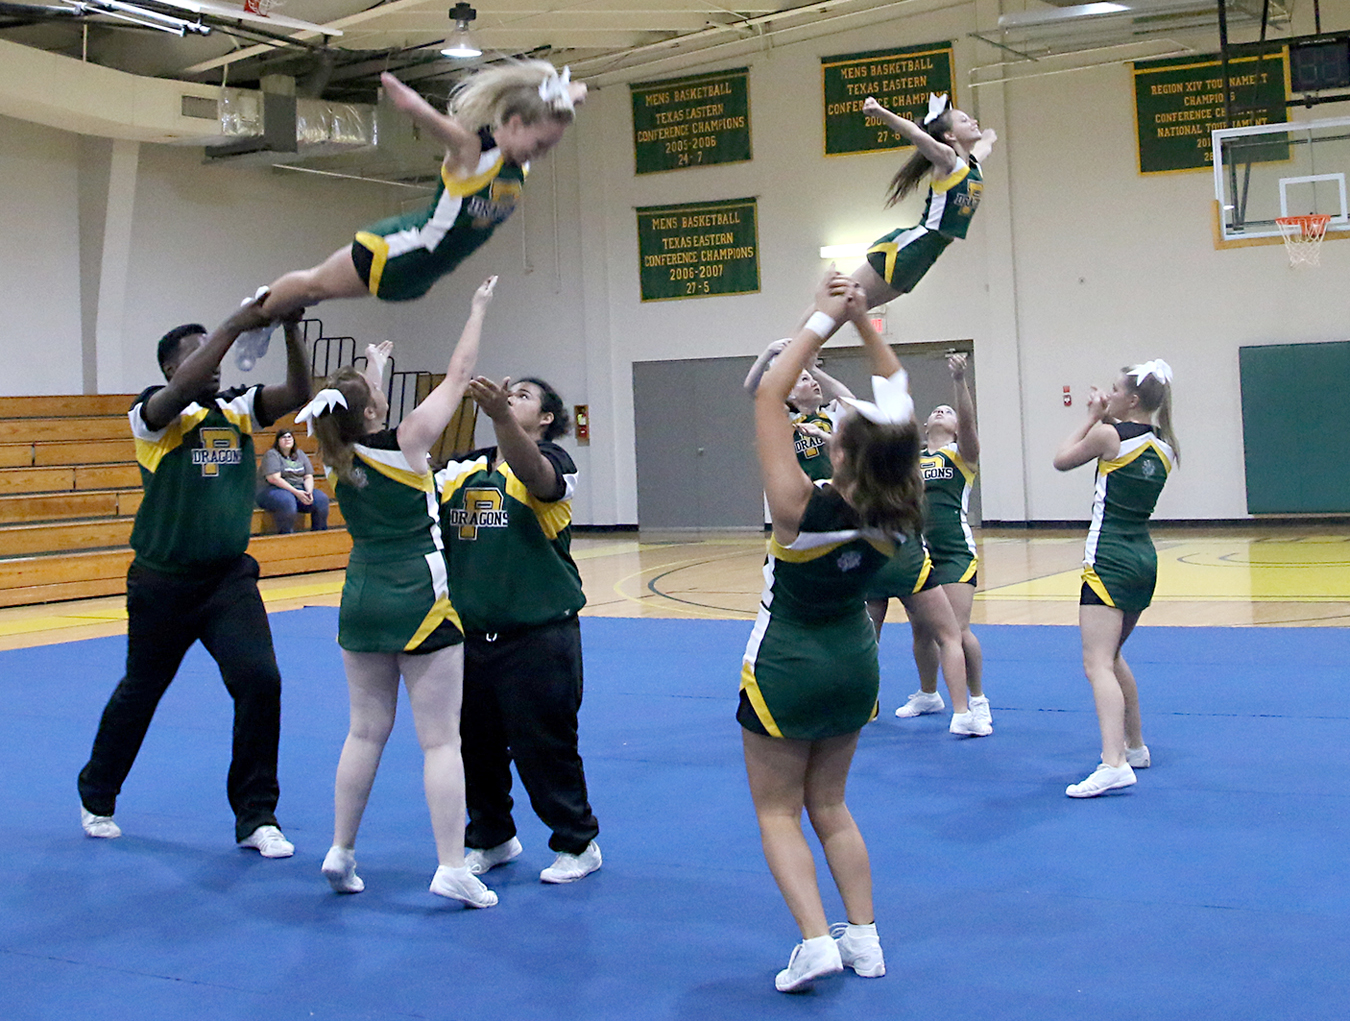 PJC Cheerleading Clinic and Tryouts this Saturday